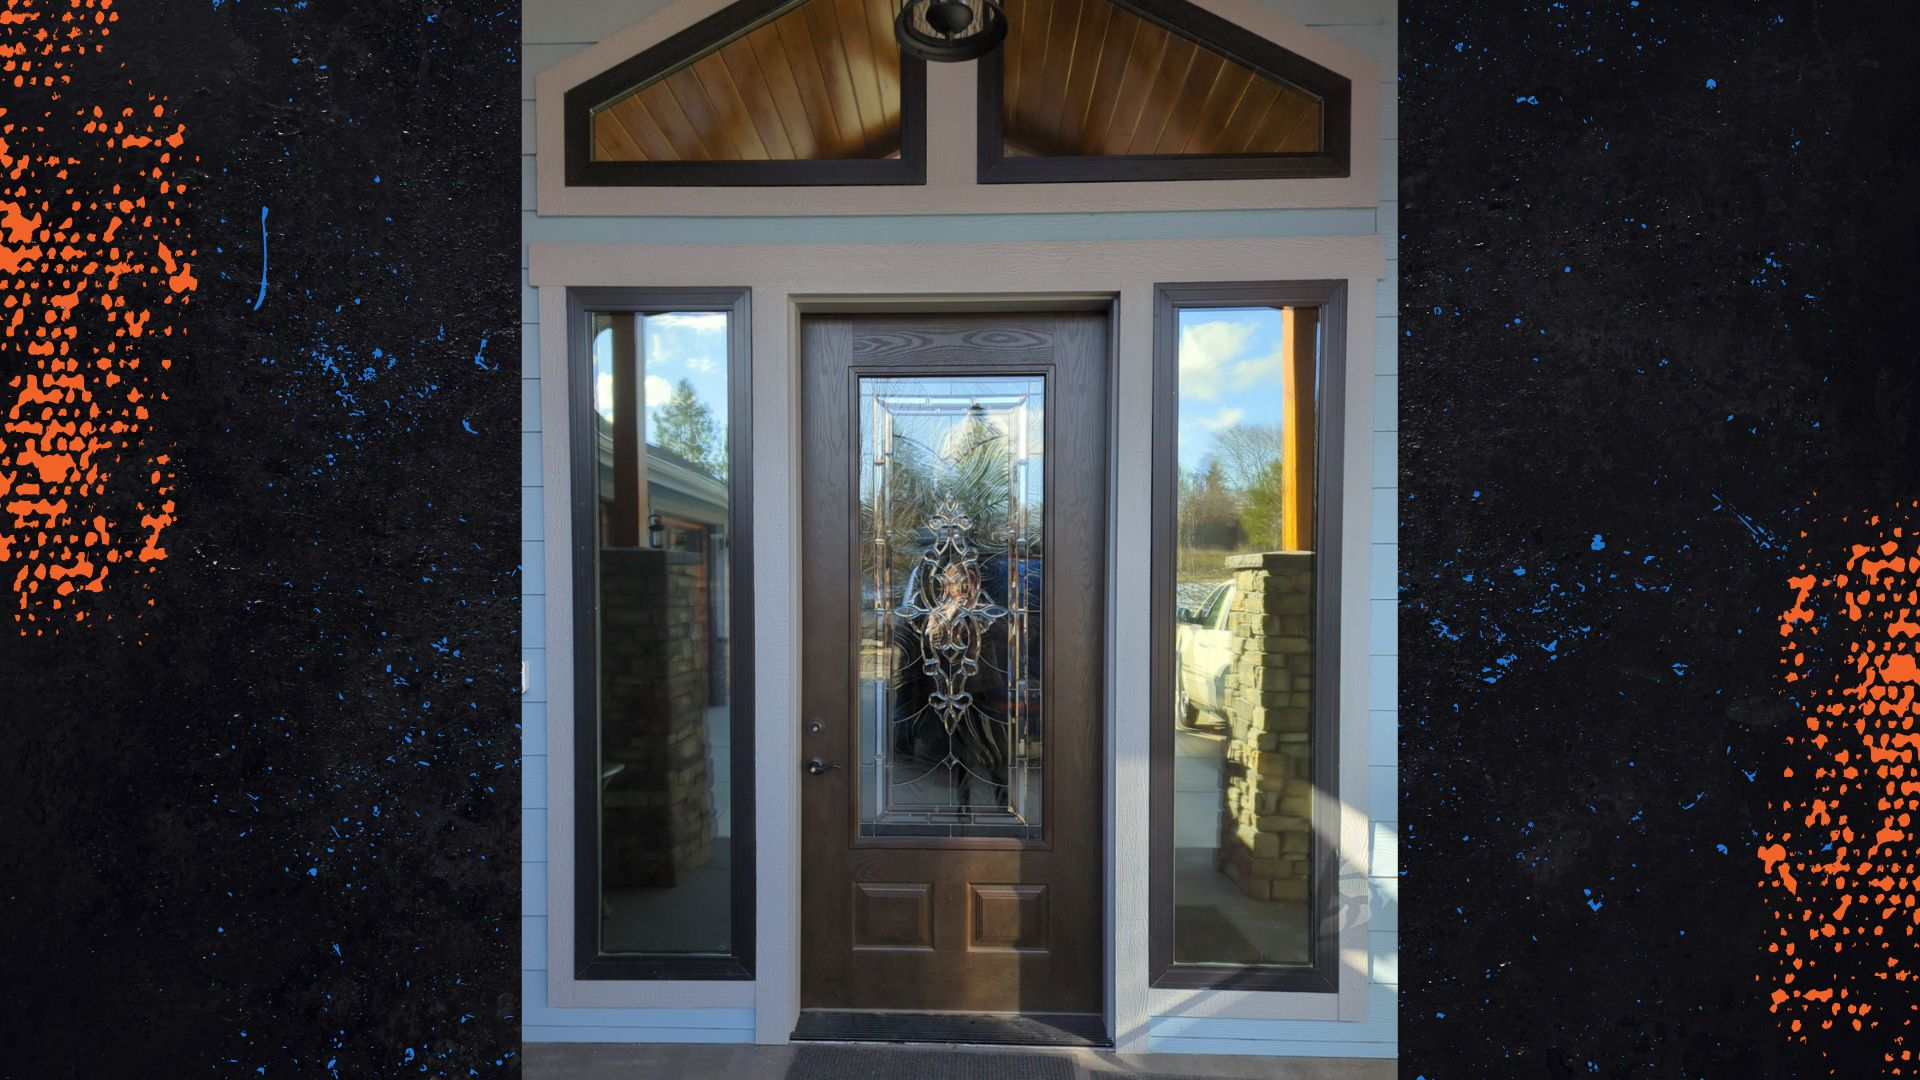 This image shows a stylish front door area with a peaked wood ceiling overhang and an elegant dark wood door with intricate glass design, framed by sidelight windows. The door reflects a serene outdoor scene, suggesting a calm and inviting entrance, while a modern security camera is visible to the left, adding a touch of technology.